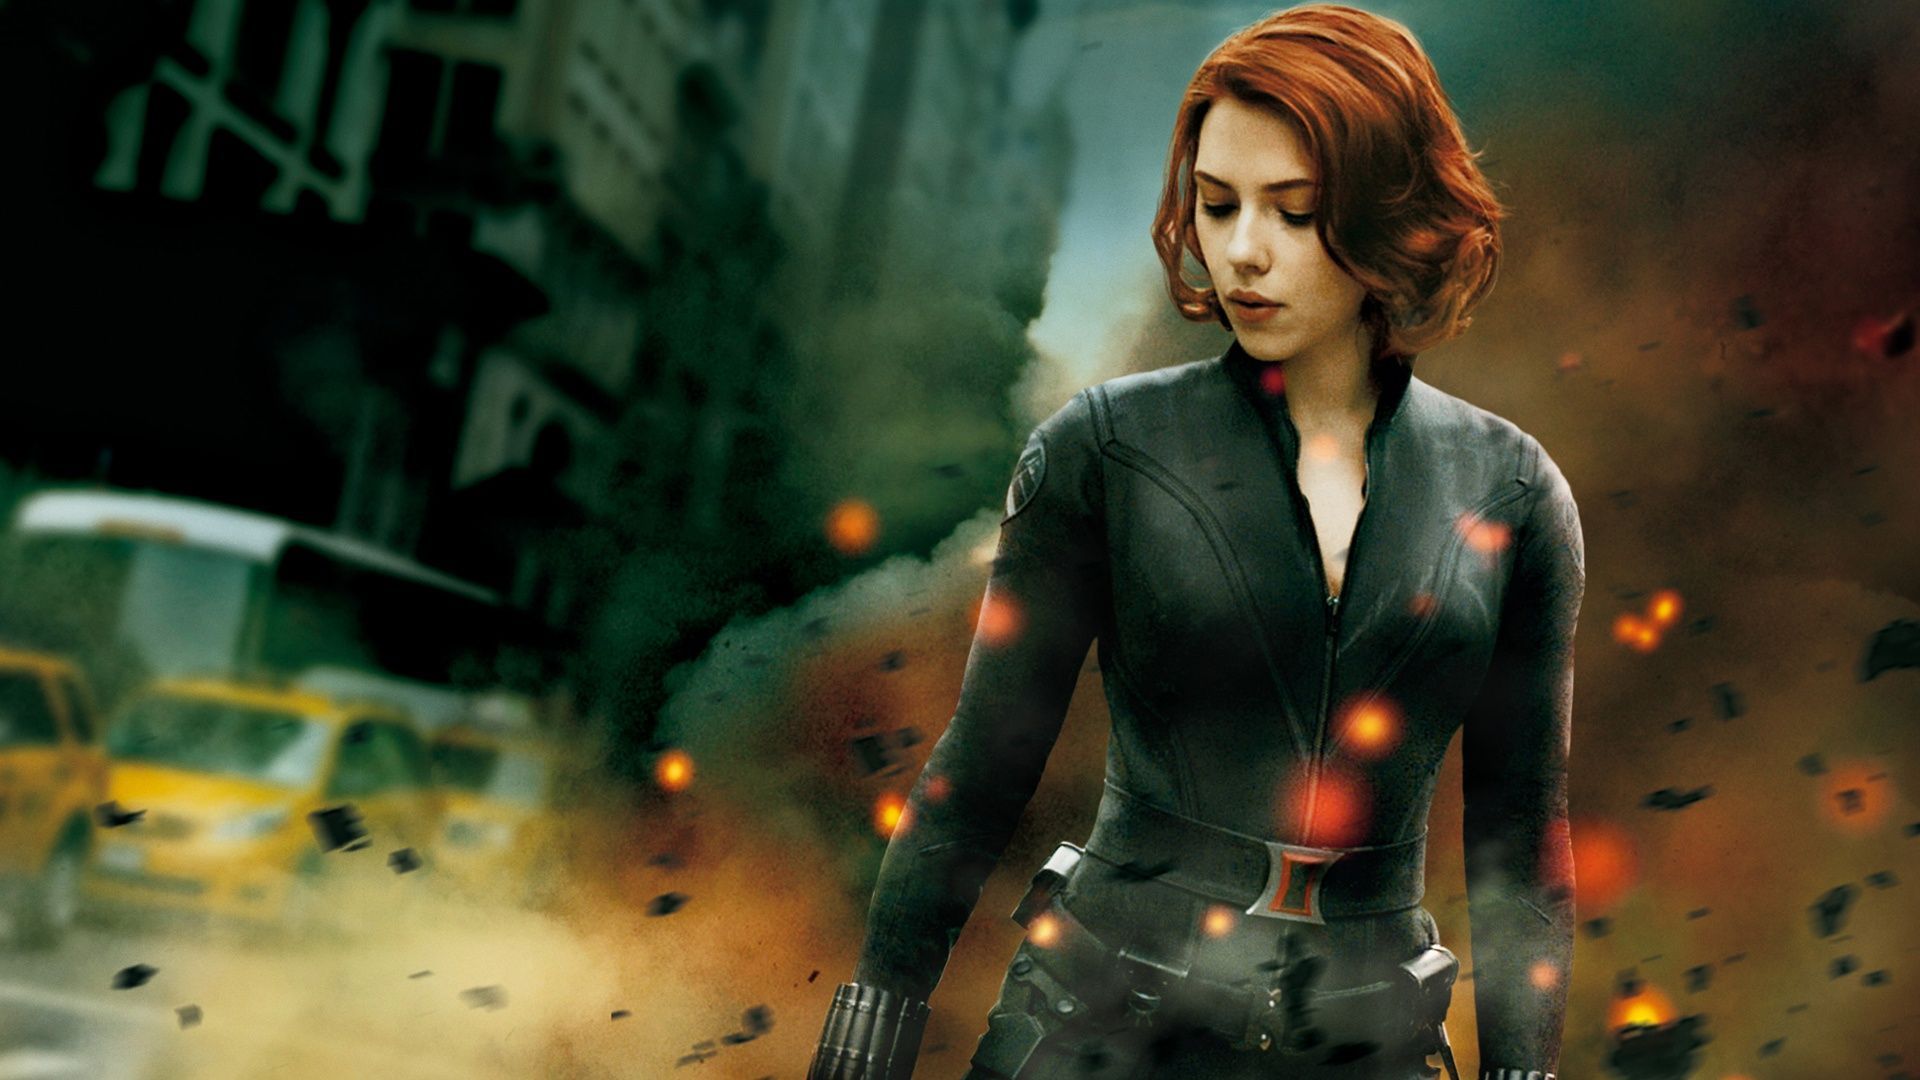 The Avengers Black Widow Wallpapers | HD Wallpapers